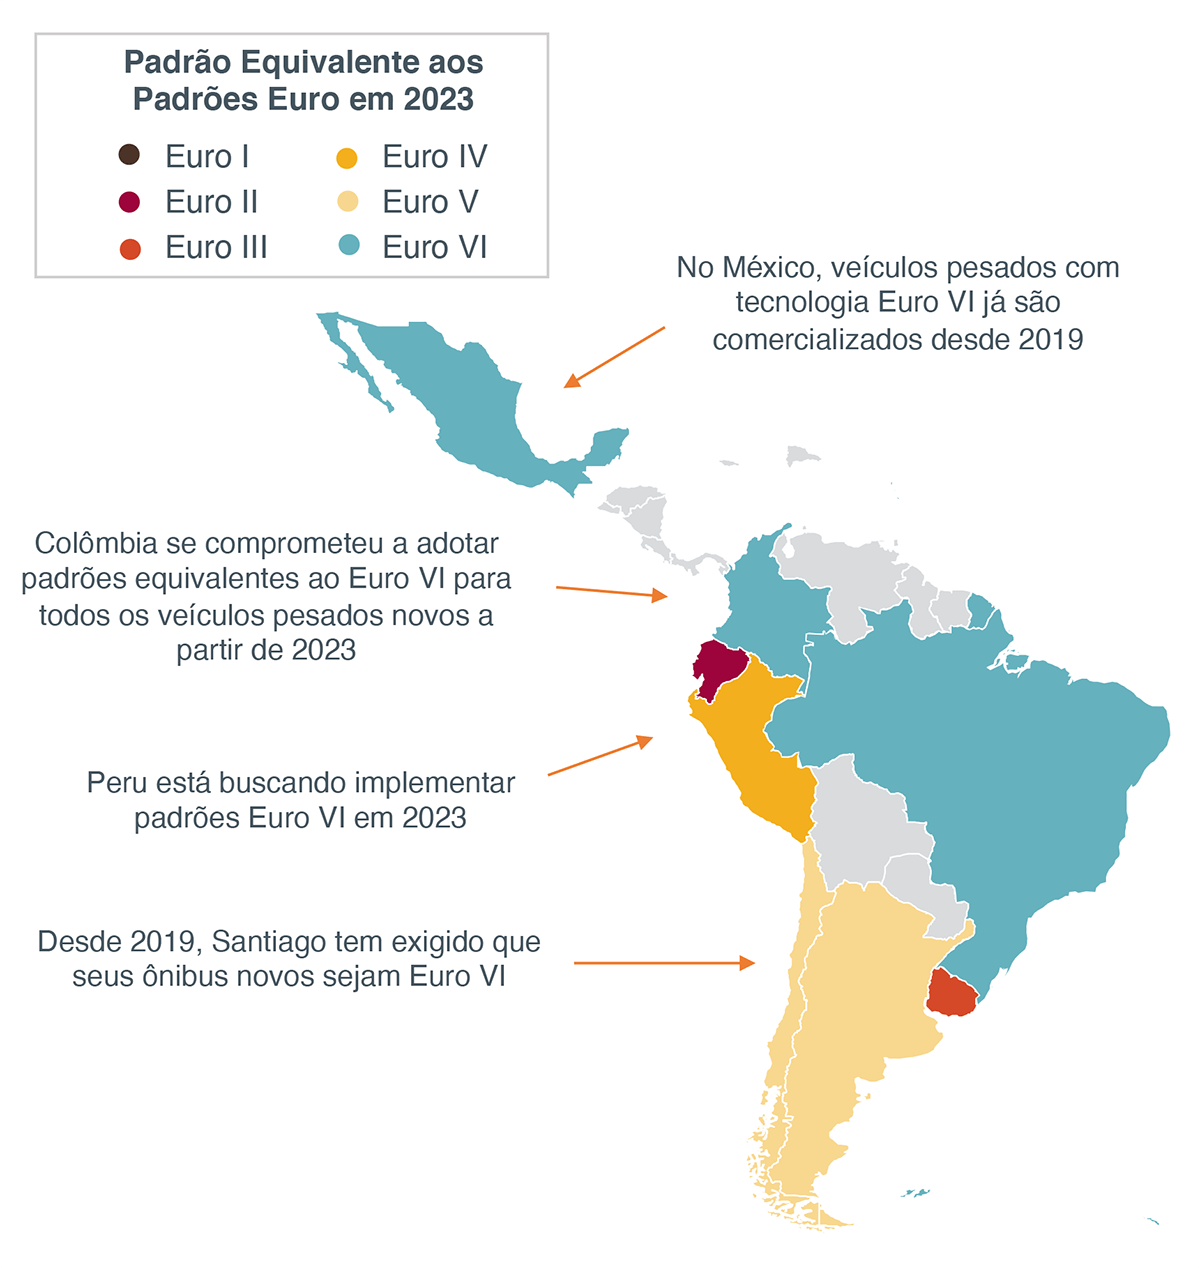 map of South America showing Euro standard implementation